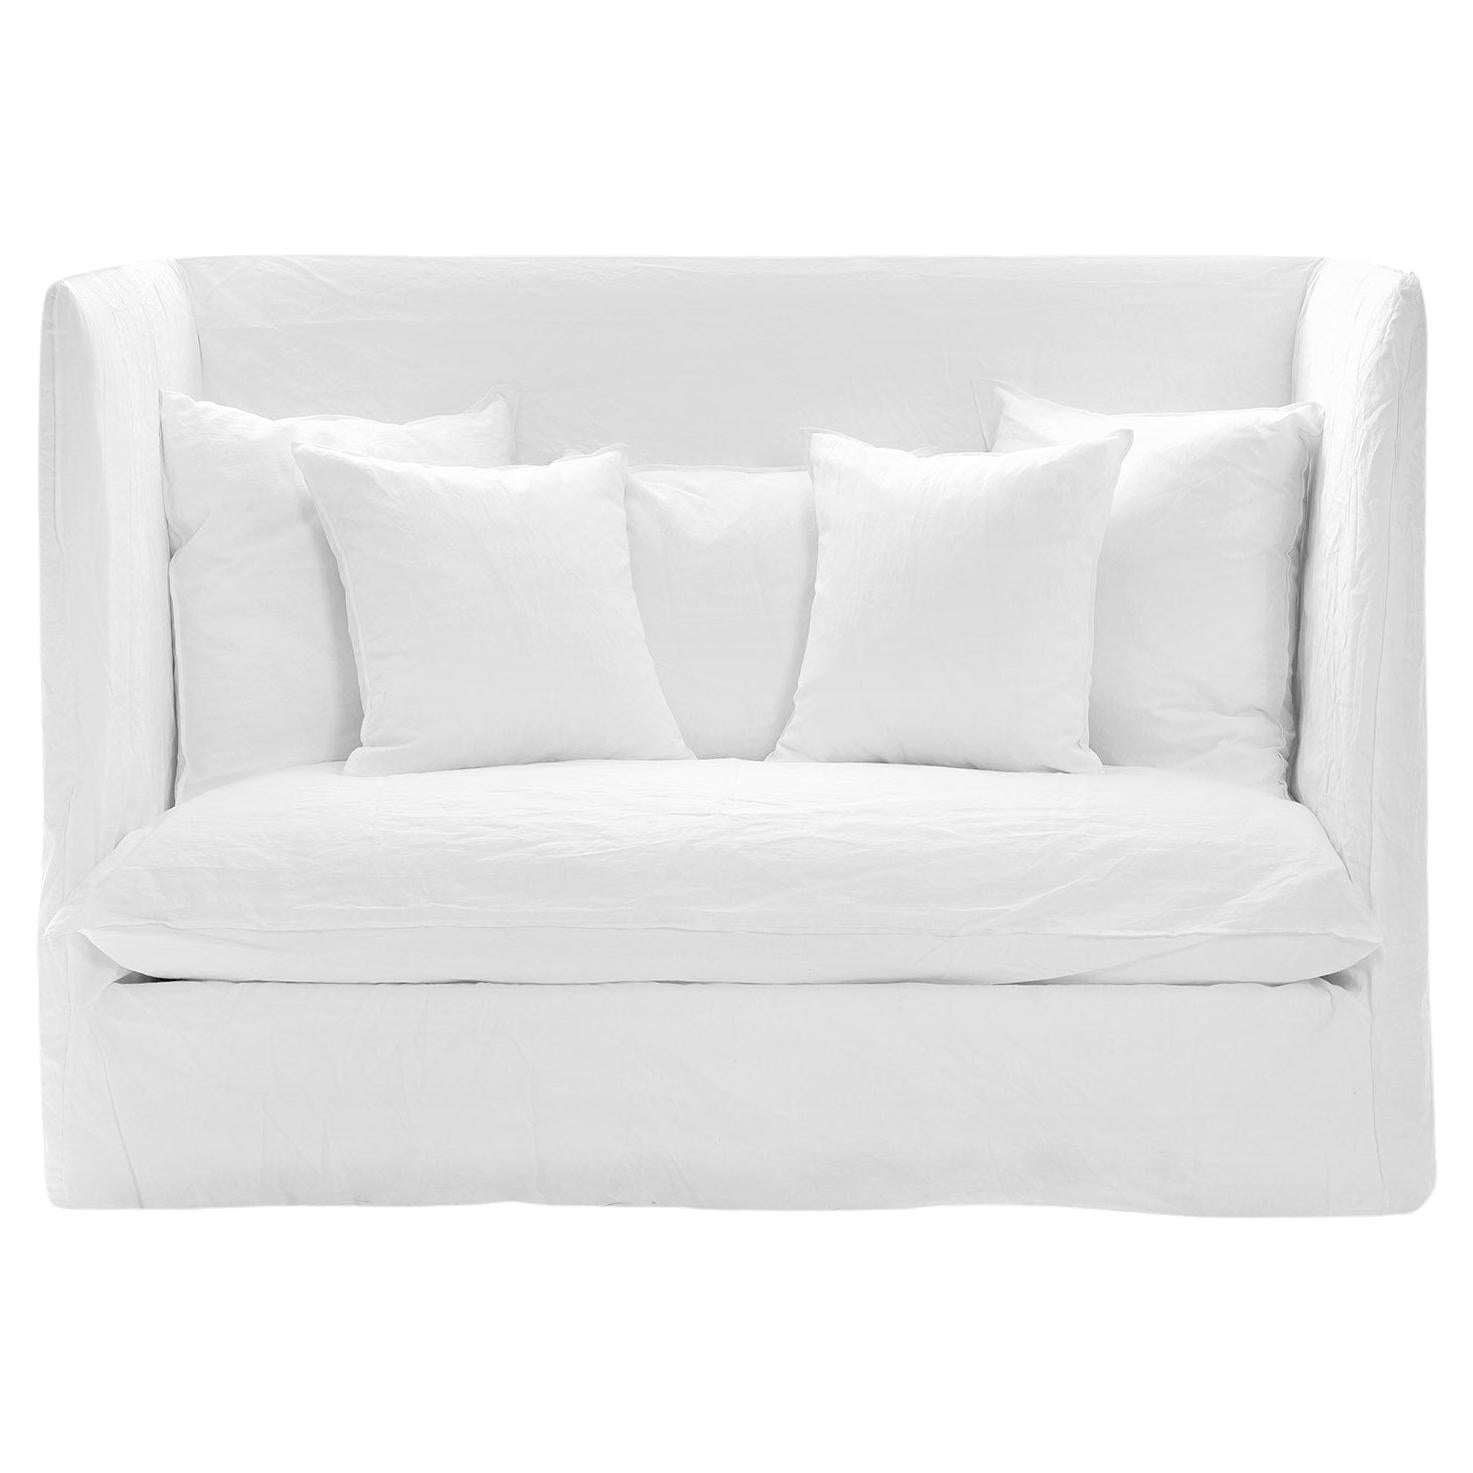 Gervasoni Ghost 18 High Back Sofa in White Linen Upholstery by Paola Navone For Sale